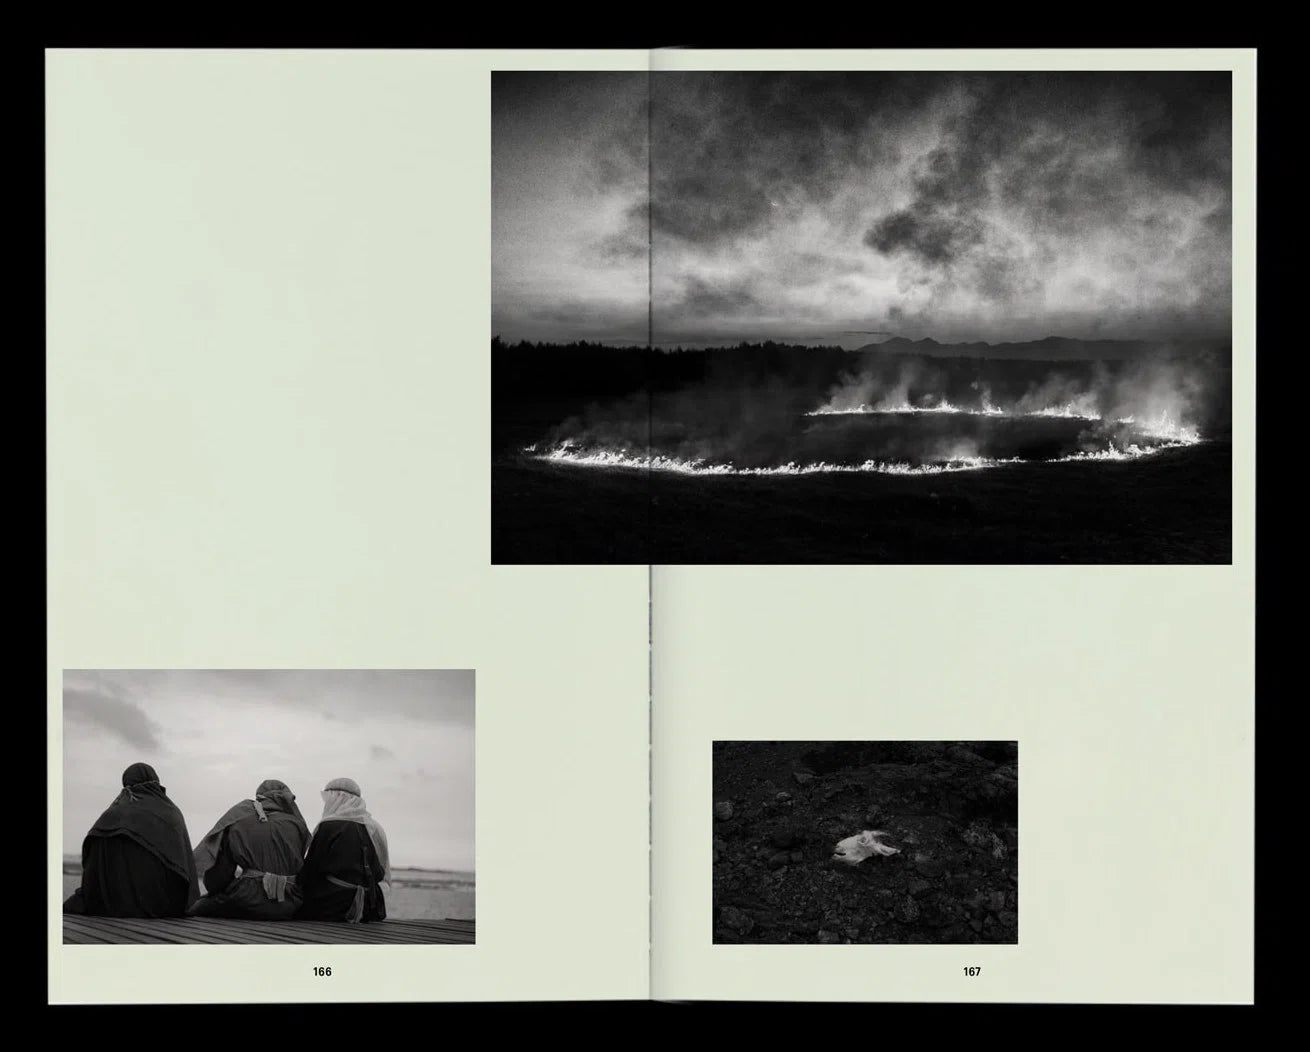 Quilo - Journal of photographic tales of brasil